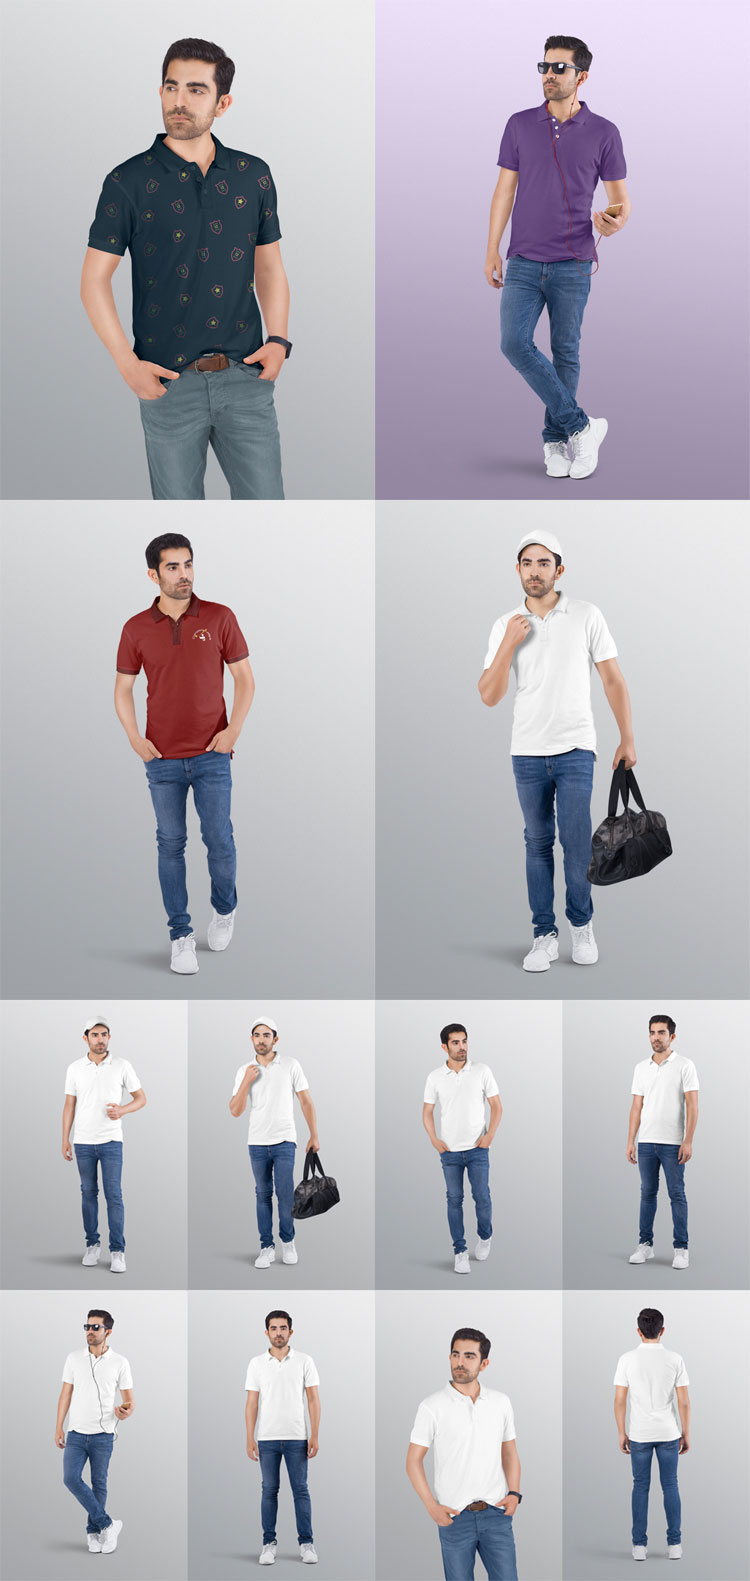 Download Men S Polo T Shirt Mockups Set Of 8 Find The Perfect Creative Mockups Freebies To Showcase Your Project To Life PSD Mockup Templates